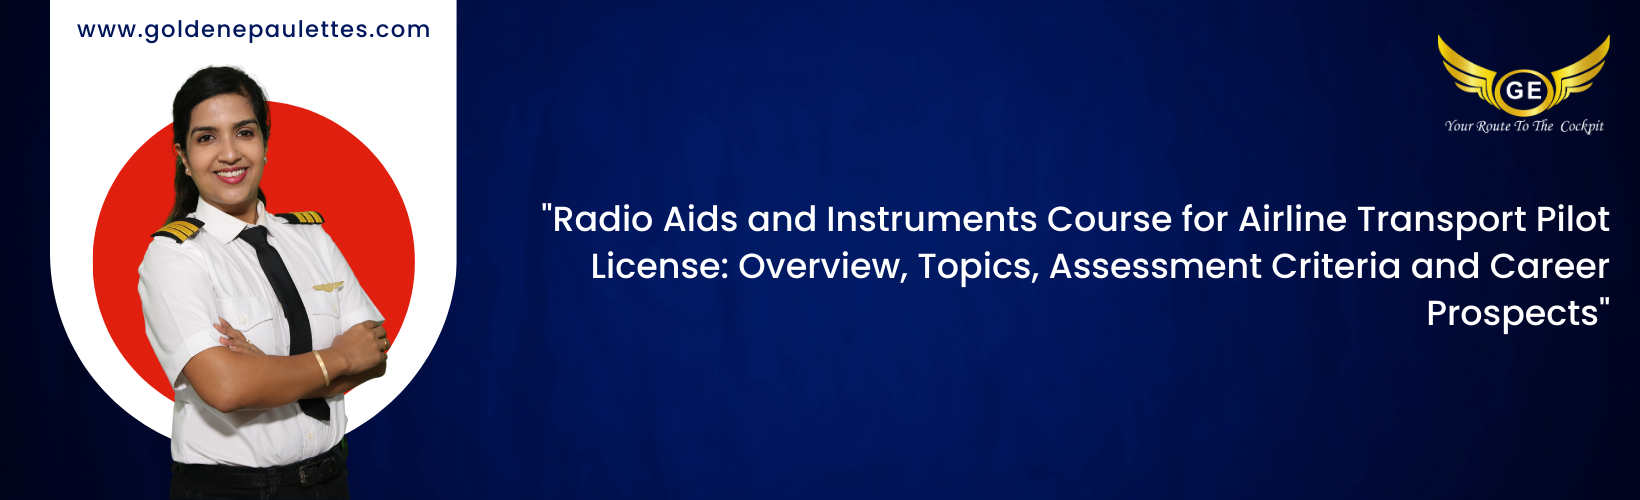 How to Prepare for the Radio Aids and Instruments Course in Airline Transport Pilot License